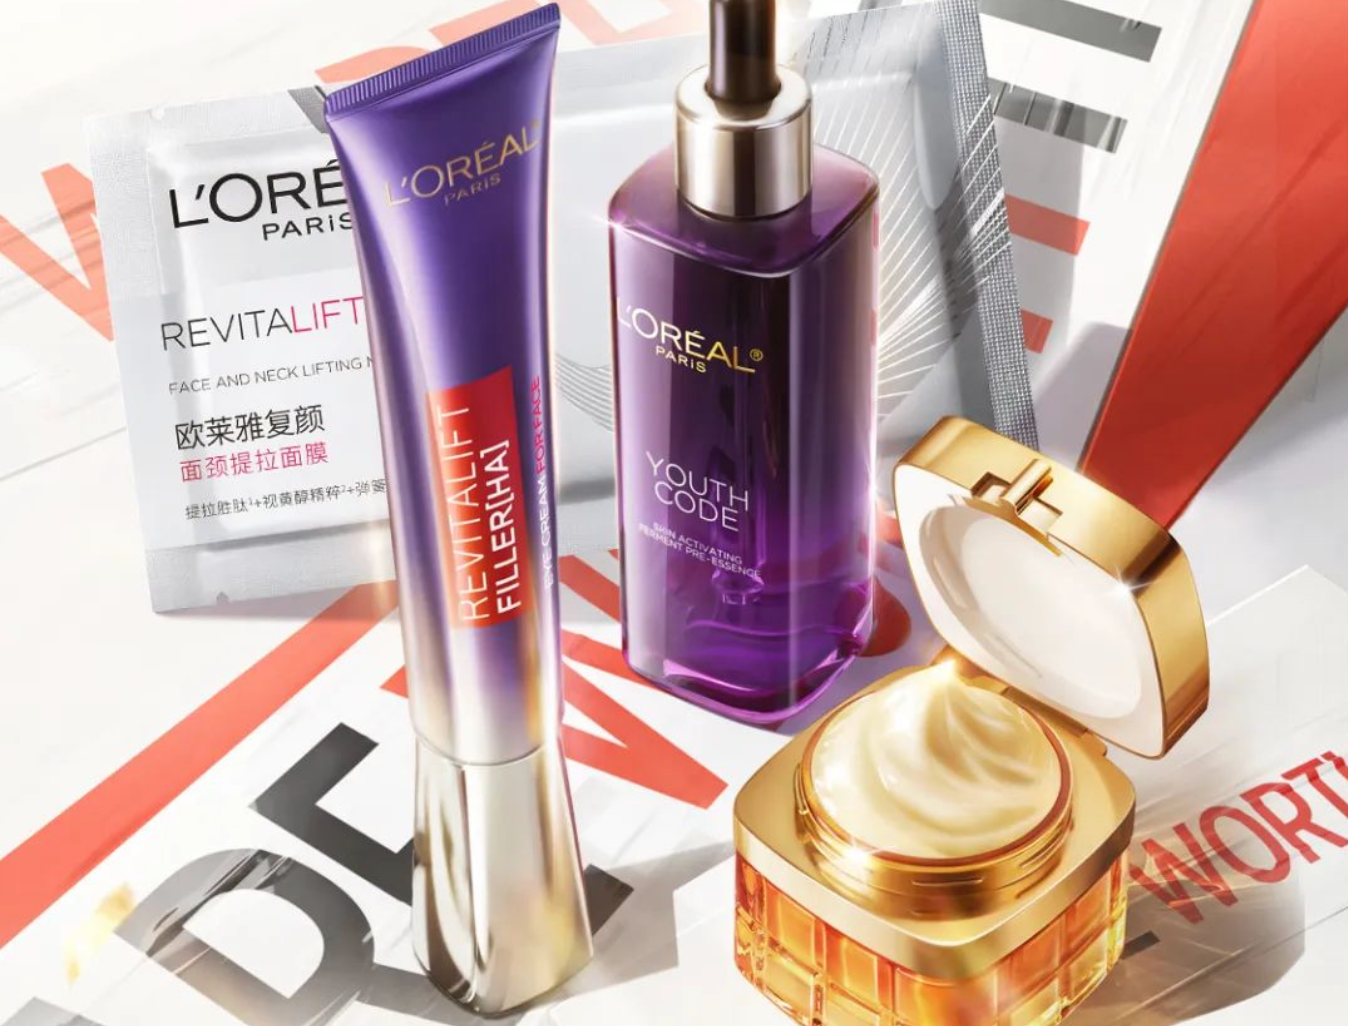 The rises come amid an economic slowdown in China. Will luxury beauty brands face a consumer backlash and stiffer local competition as a result? Image: WeChat